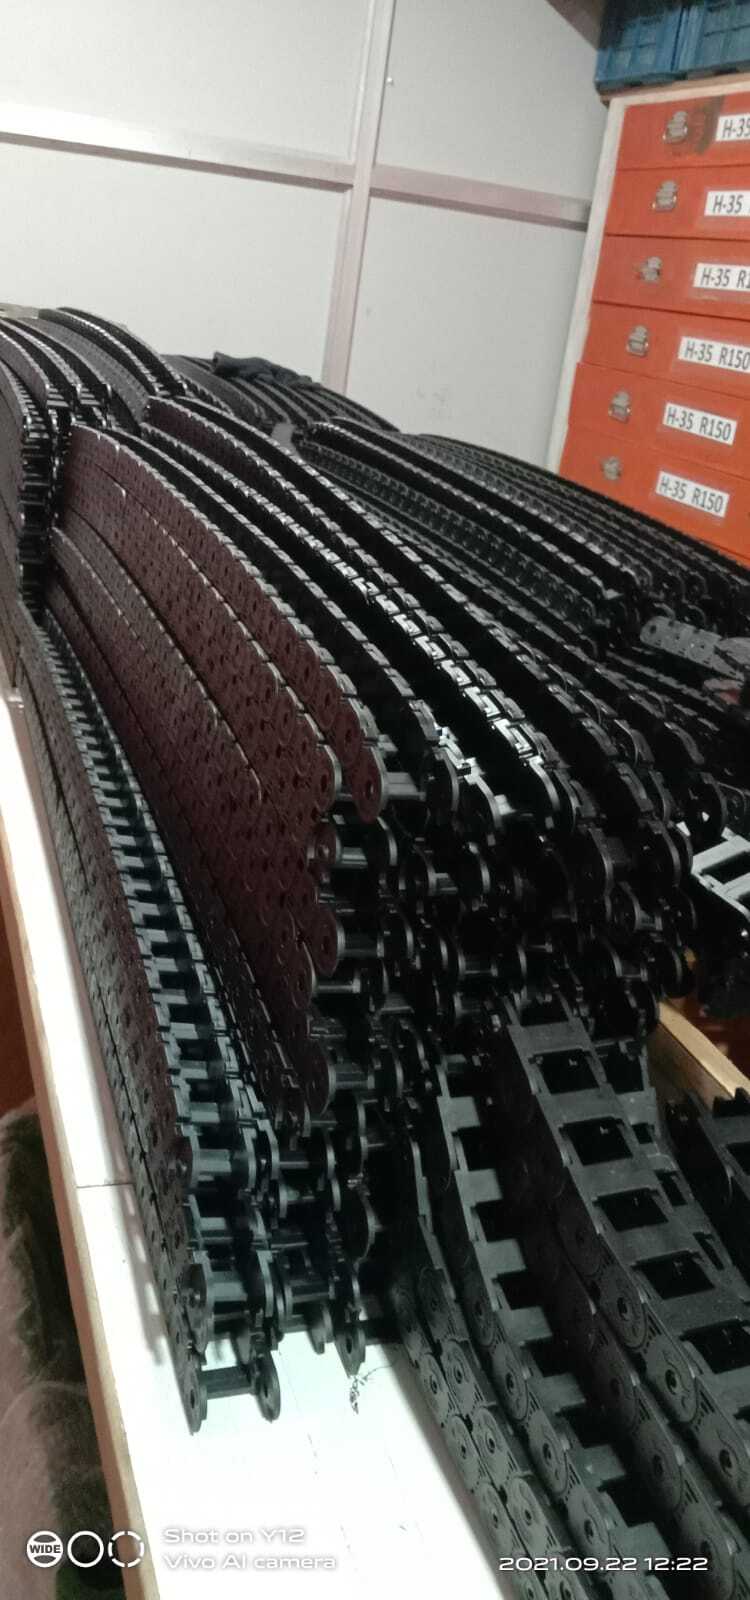 Cable Drag Chain Size/Capacity 20x40 Open Chain